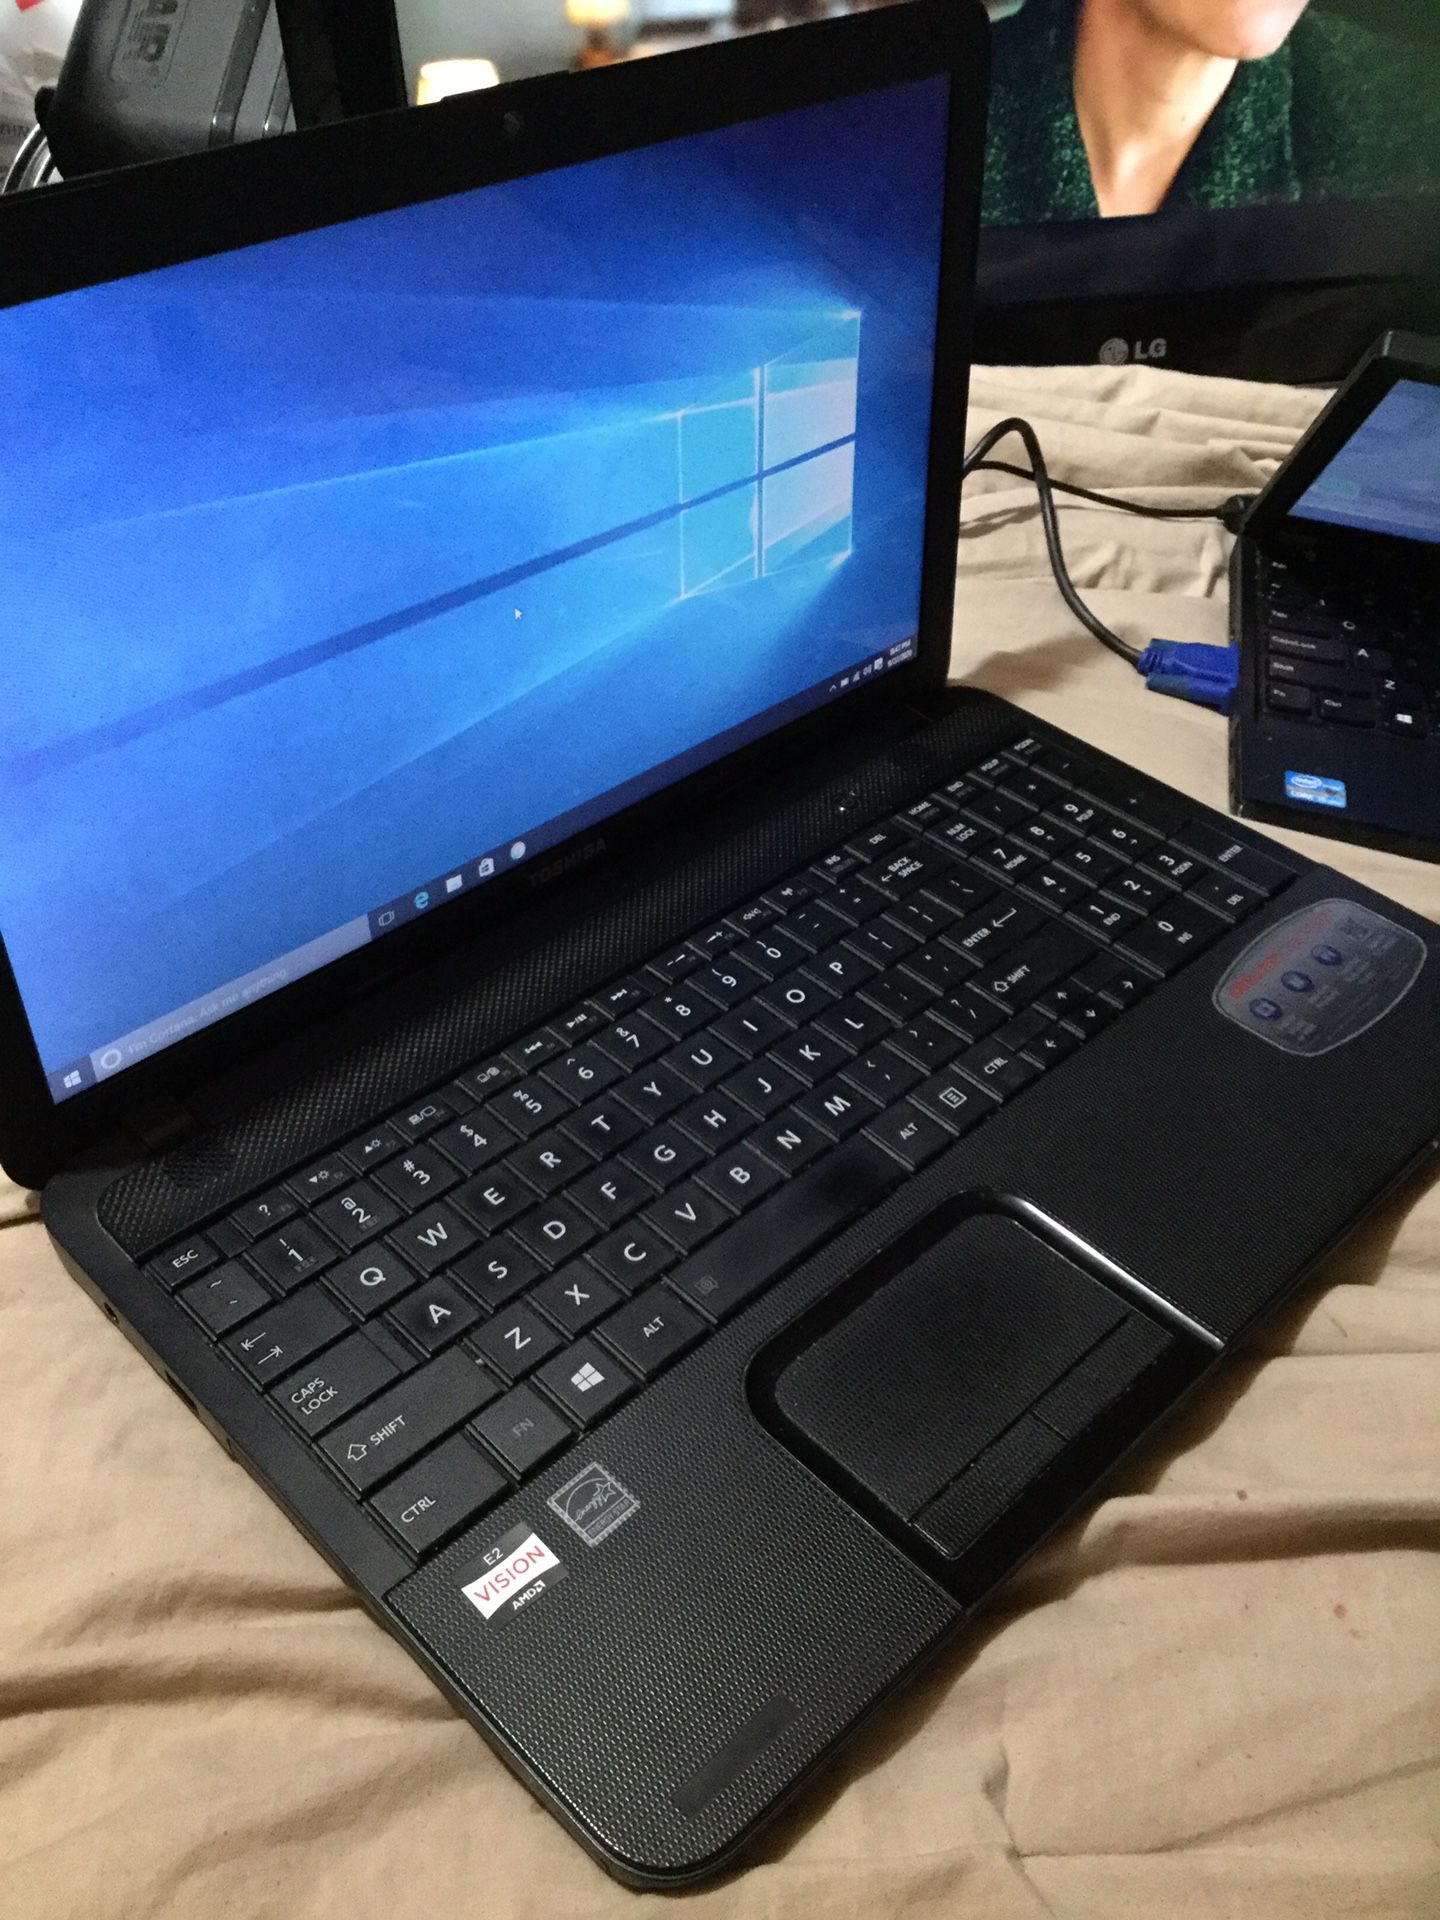 Laptop 15” Toshiba Windows10 /500GB HD 4GB ram MS OFFICE pro / webcam New battery with charge $149